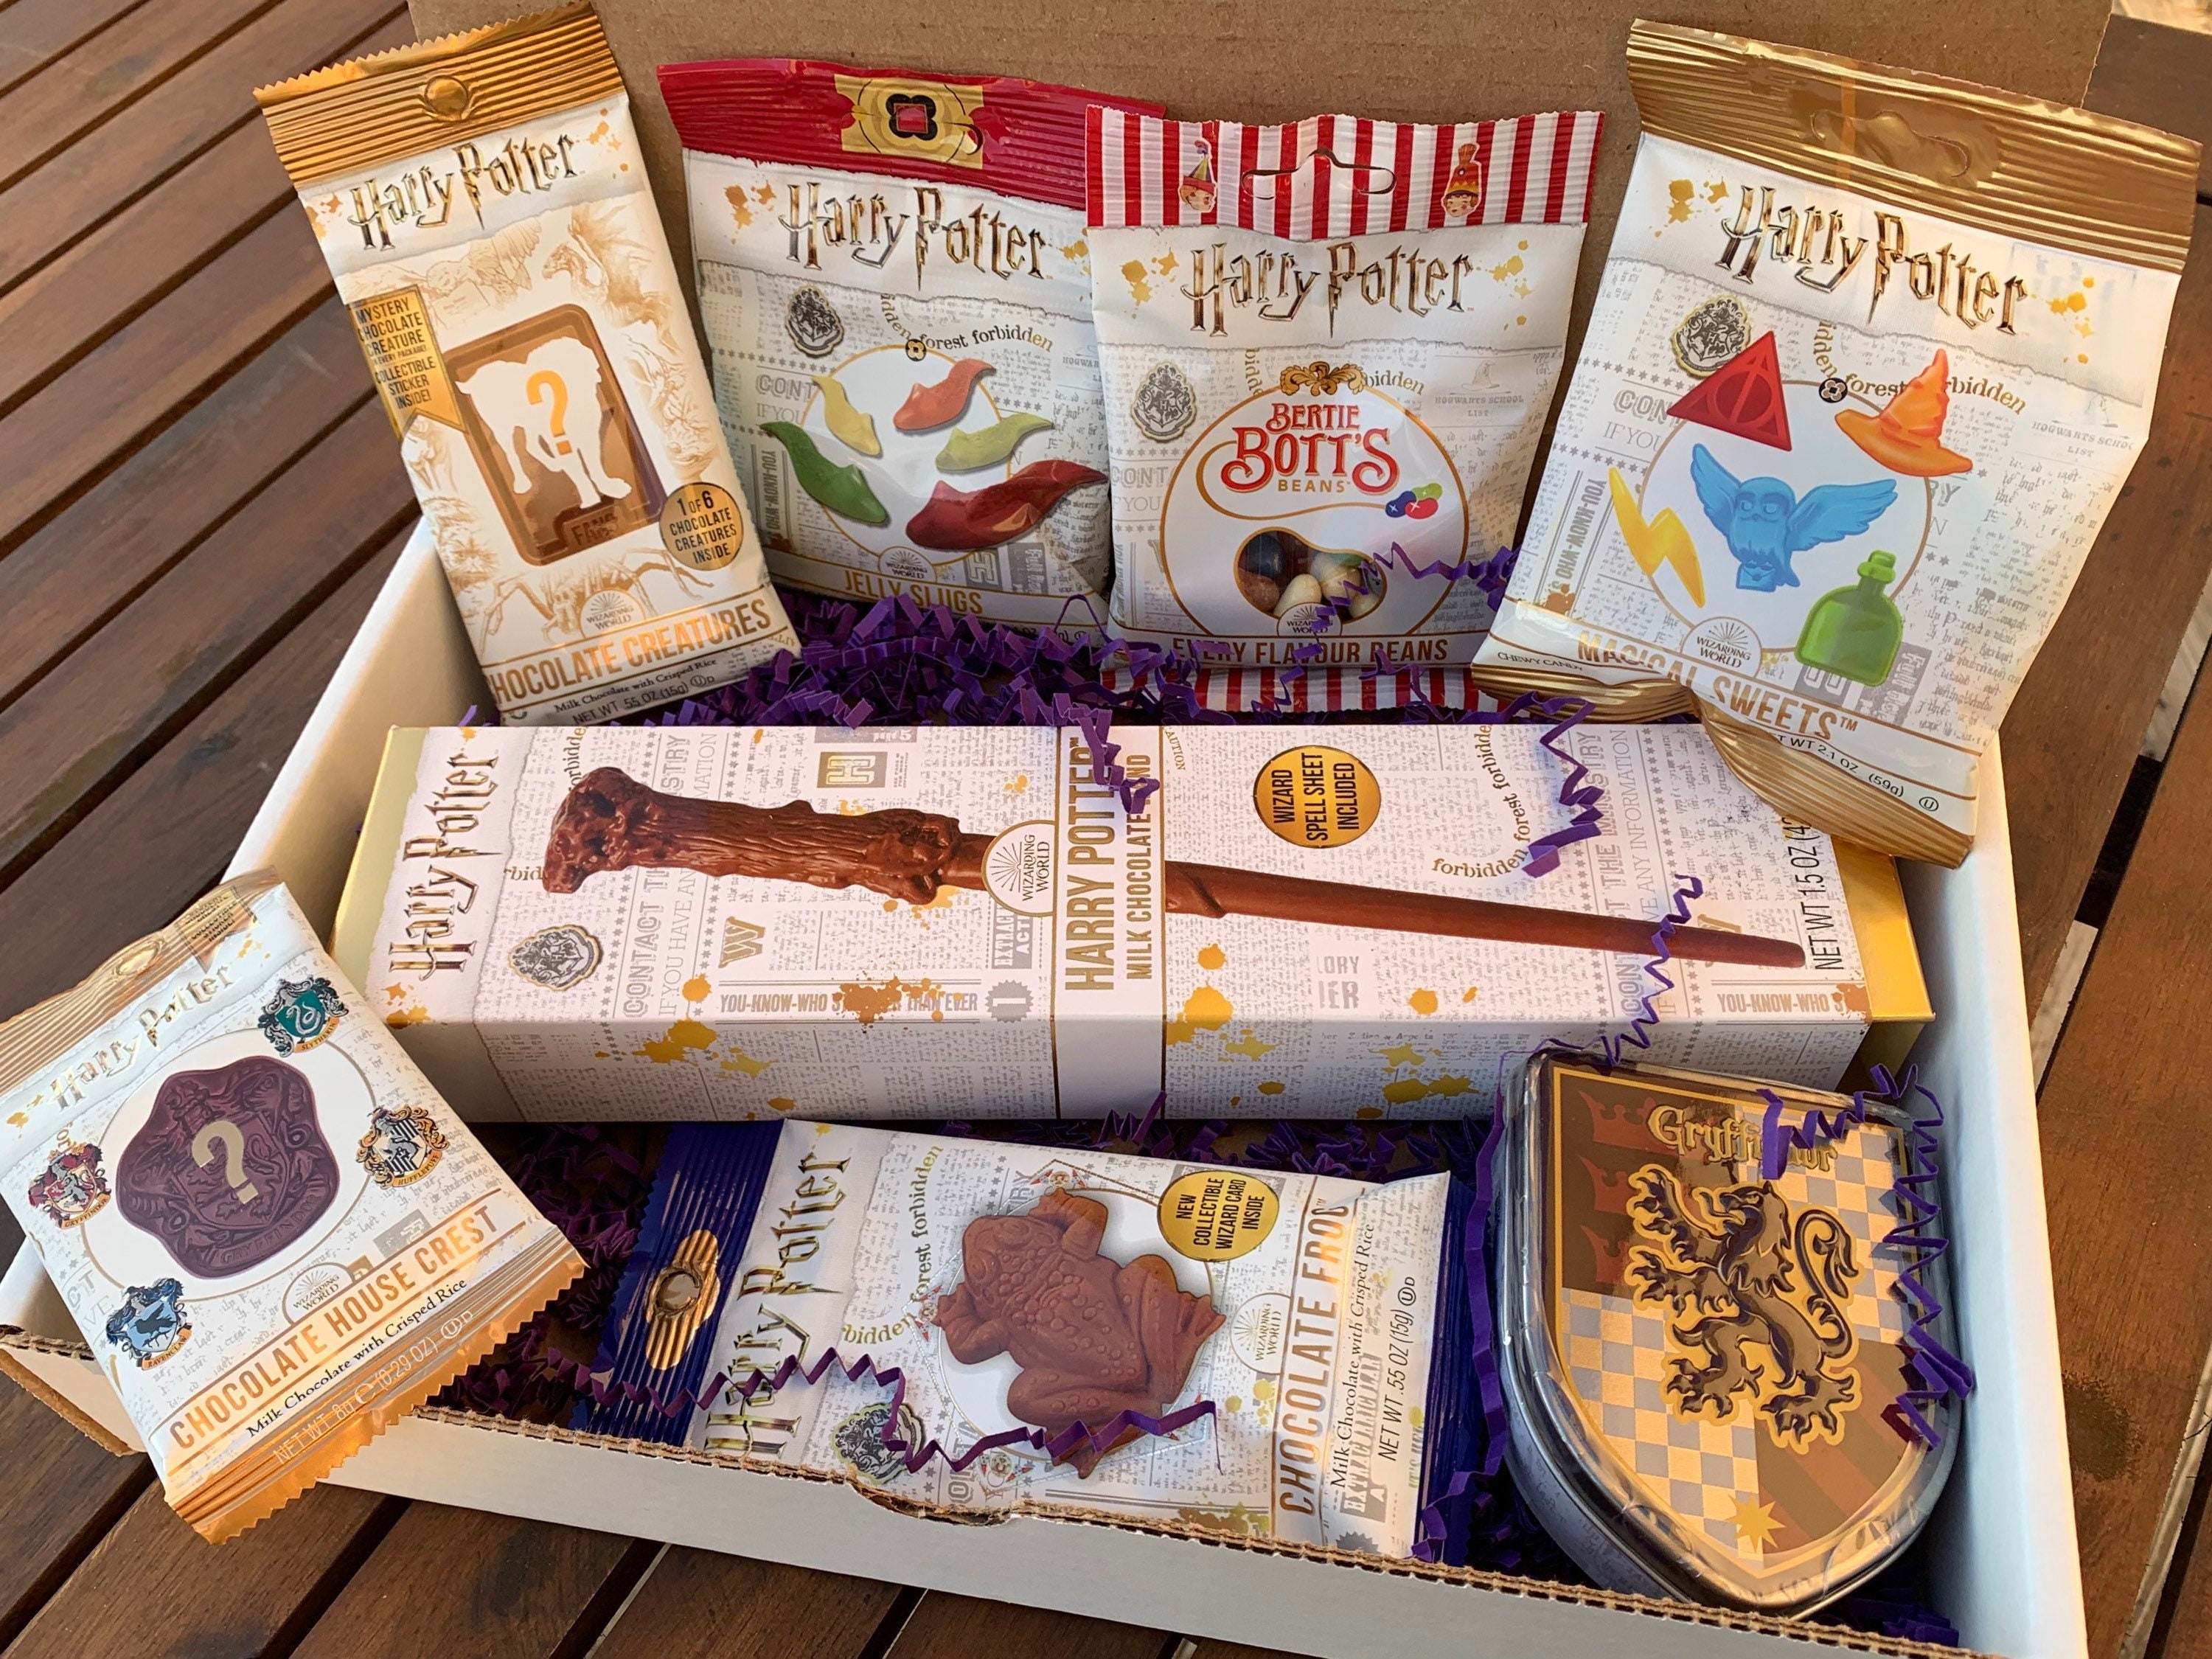  WhataBundle! Gift Box Harry Potter Candy Pack of 10 - Harry  Potter Chocolate Frogs, Bertie Bott's Beans, Jelly Slugs and More - Harry  Potter Gifts for All Ages : Grocery & Gourmet Food